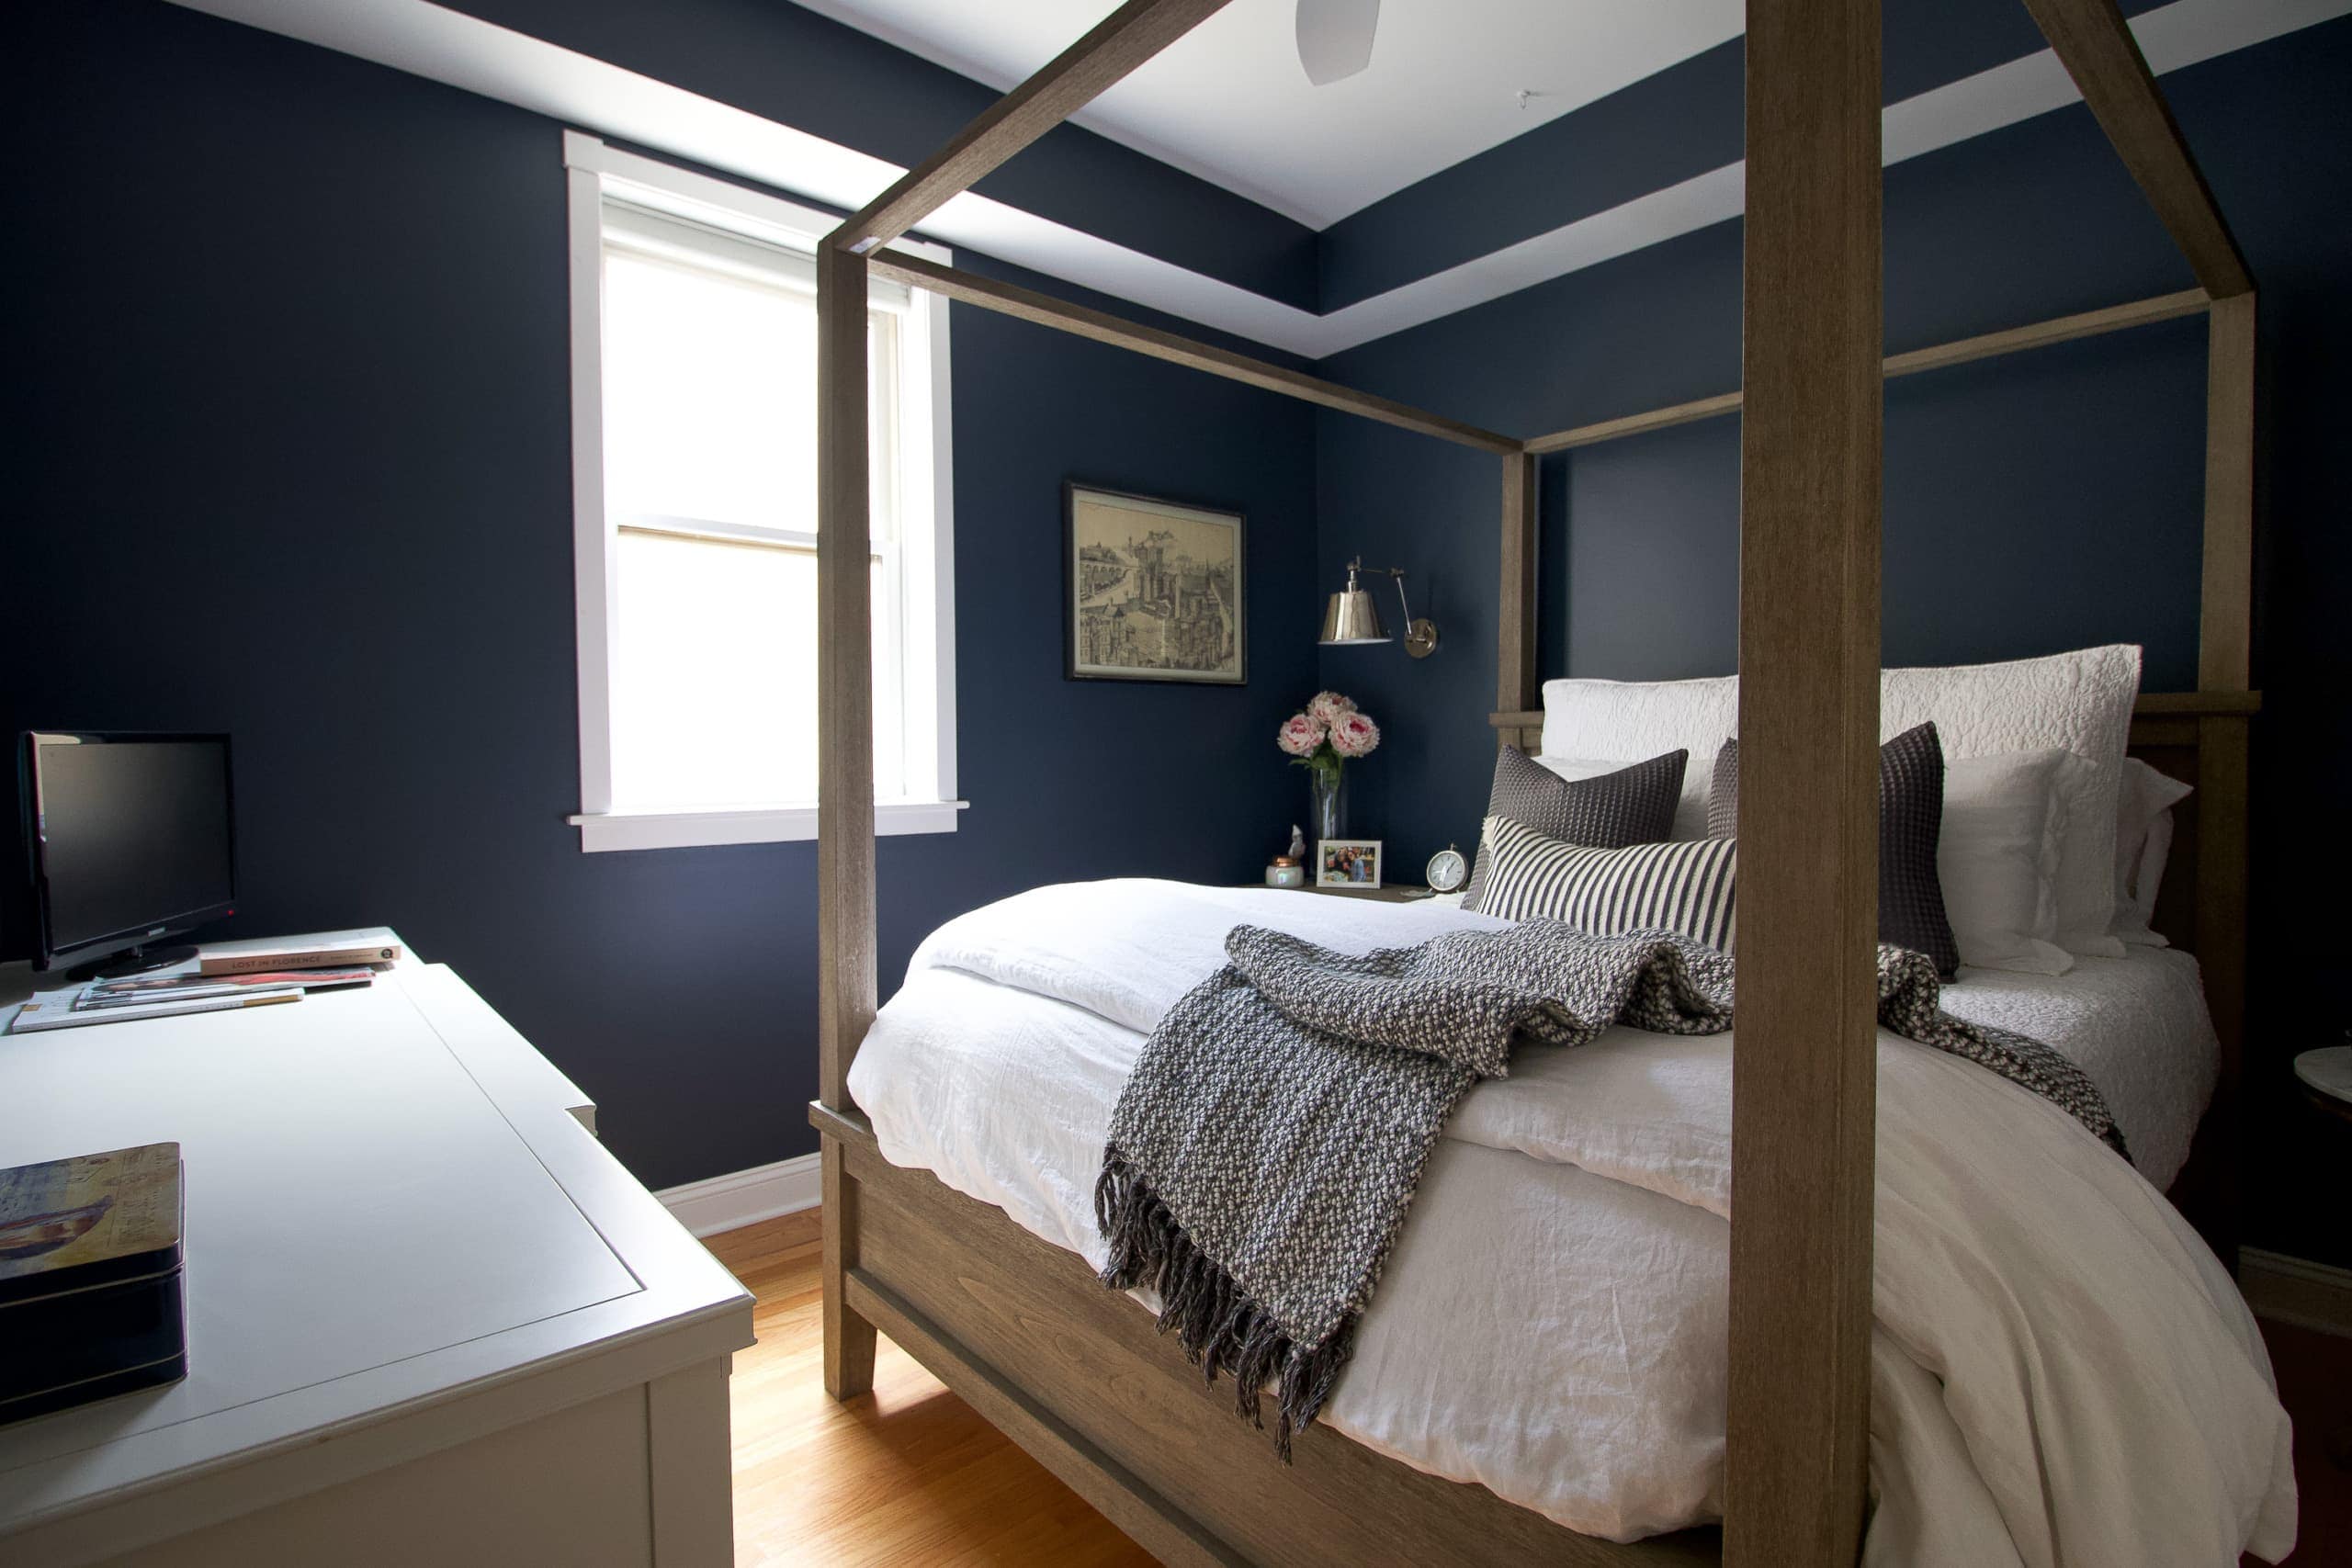 Sources for this navy guest bedroom